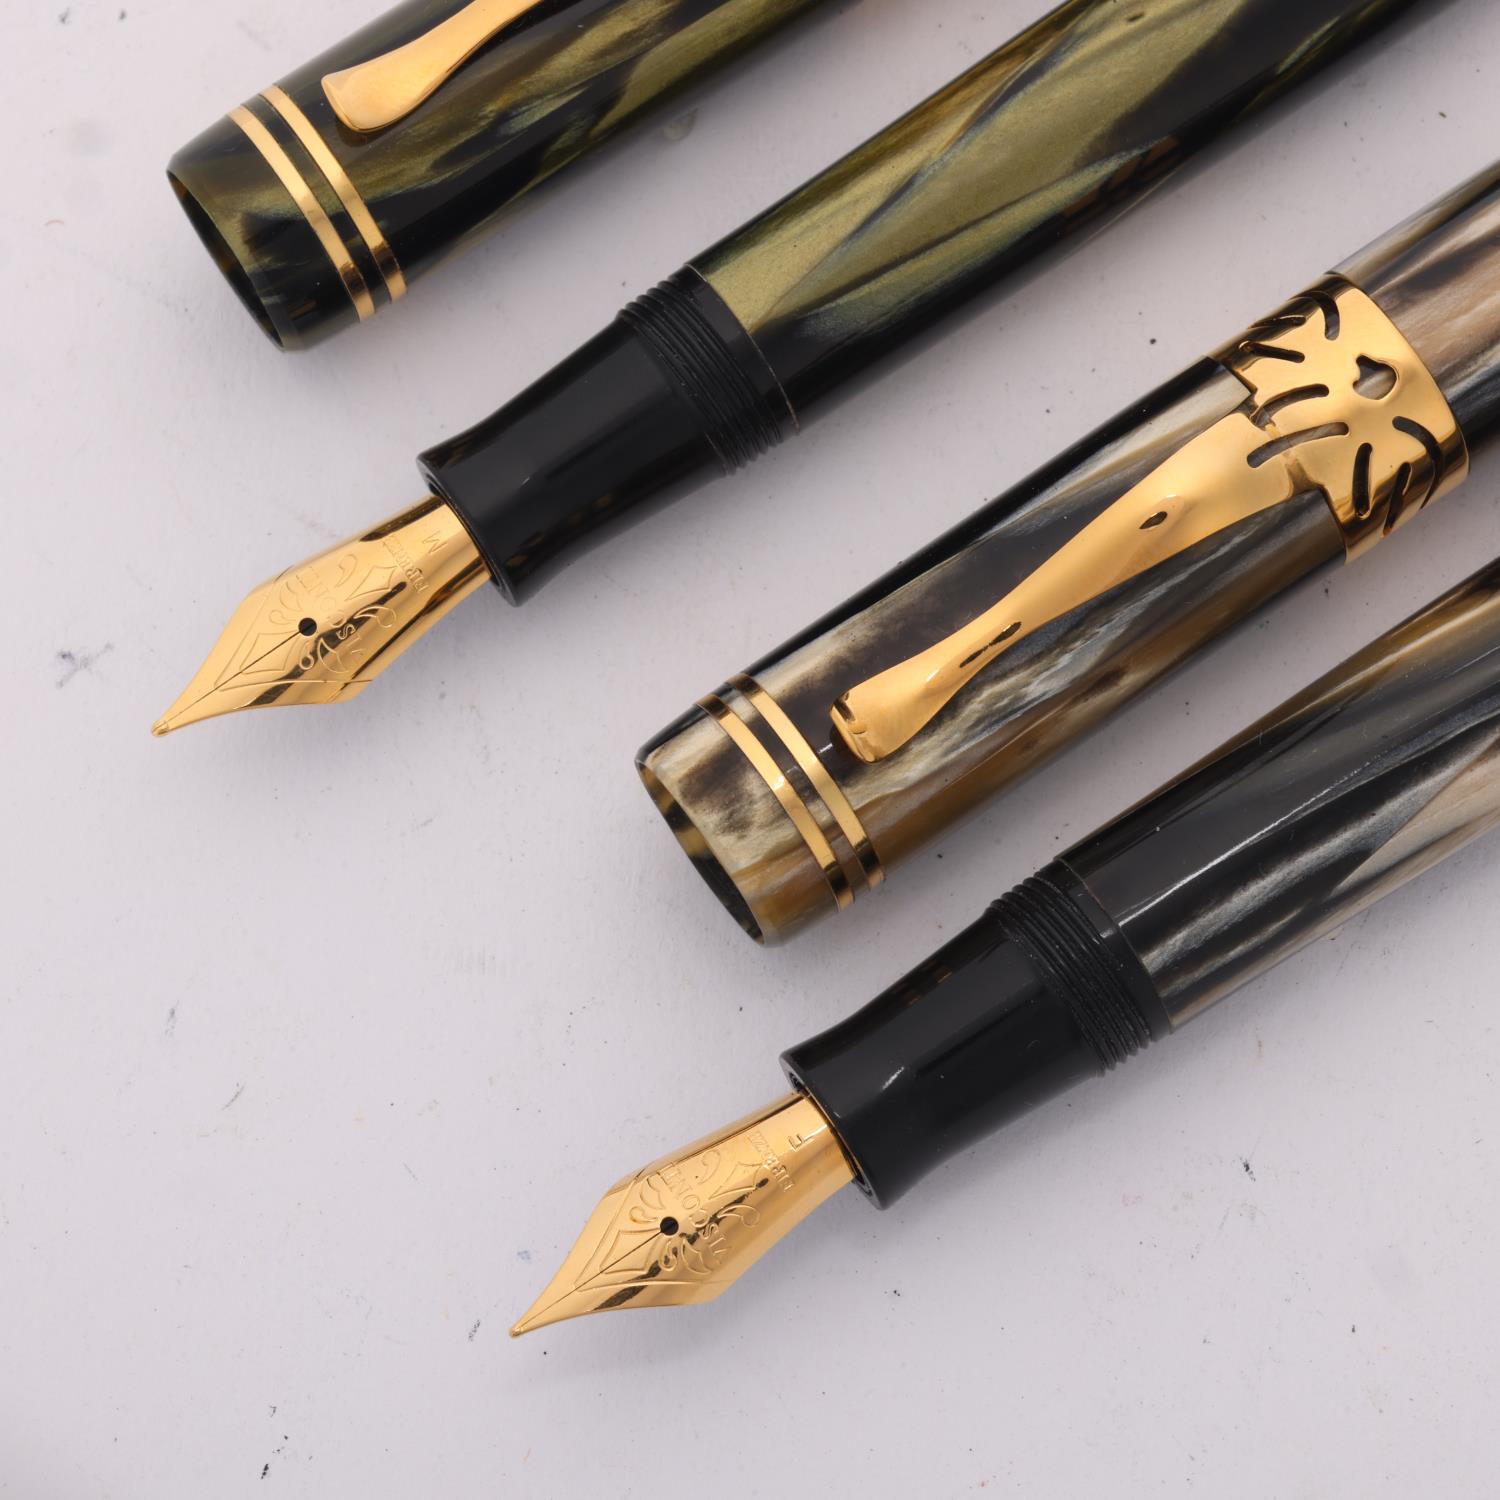 2 Visconti "Frederico II" fountain pens, piston fill with marbled body, limited edition of 800, both - Bild 2 aus 4